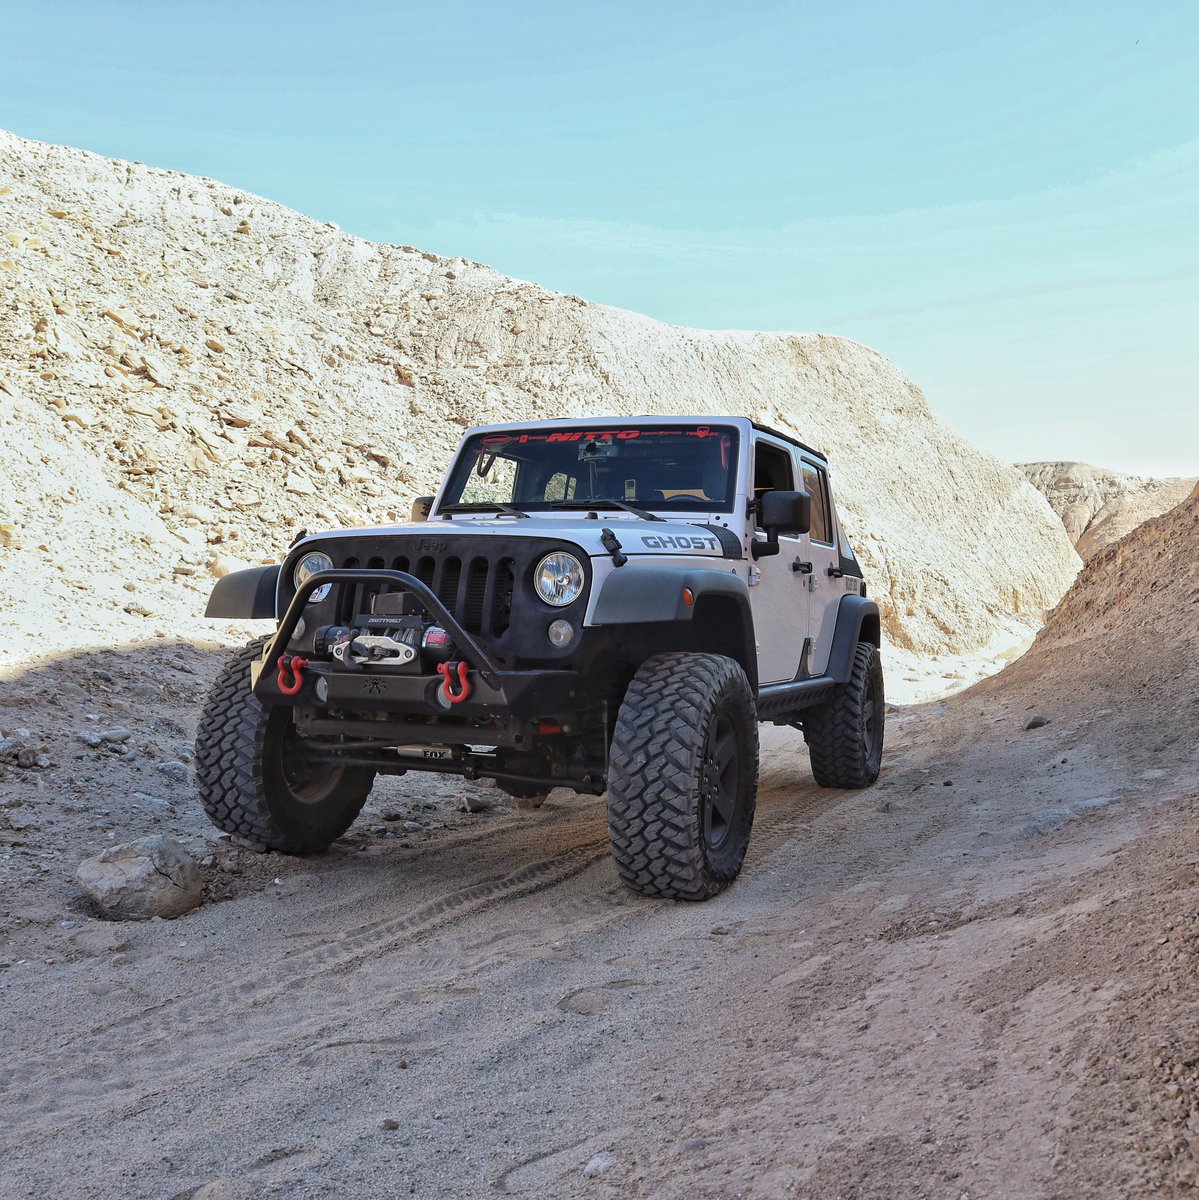 After an awesome weekend away from the city the work week is gonna suck!

#Jeep #Jeepers #JeepWave #JeepWrangler #NittoTires #OffRoad #Adventures #AnzaBorrego

_OIIIIIIIO_
@Jeep | @THEJeepMafia | @NittoTire | @onXmaps | @2fingeredsocie1